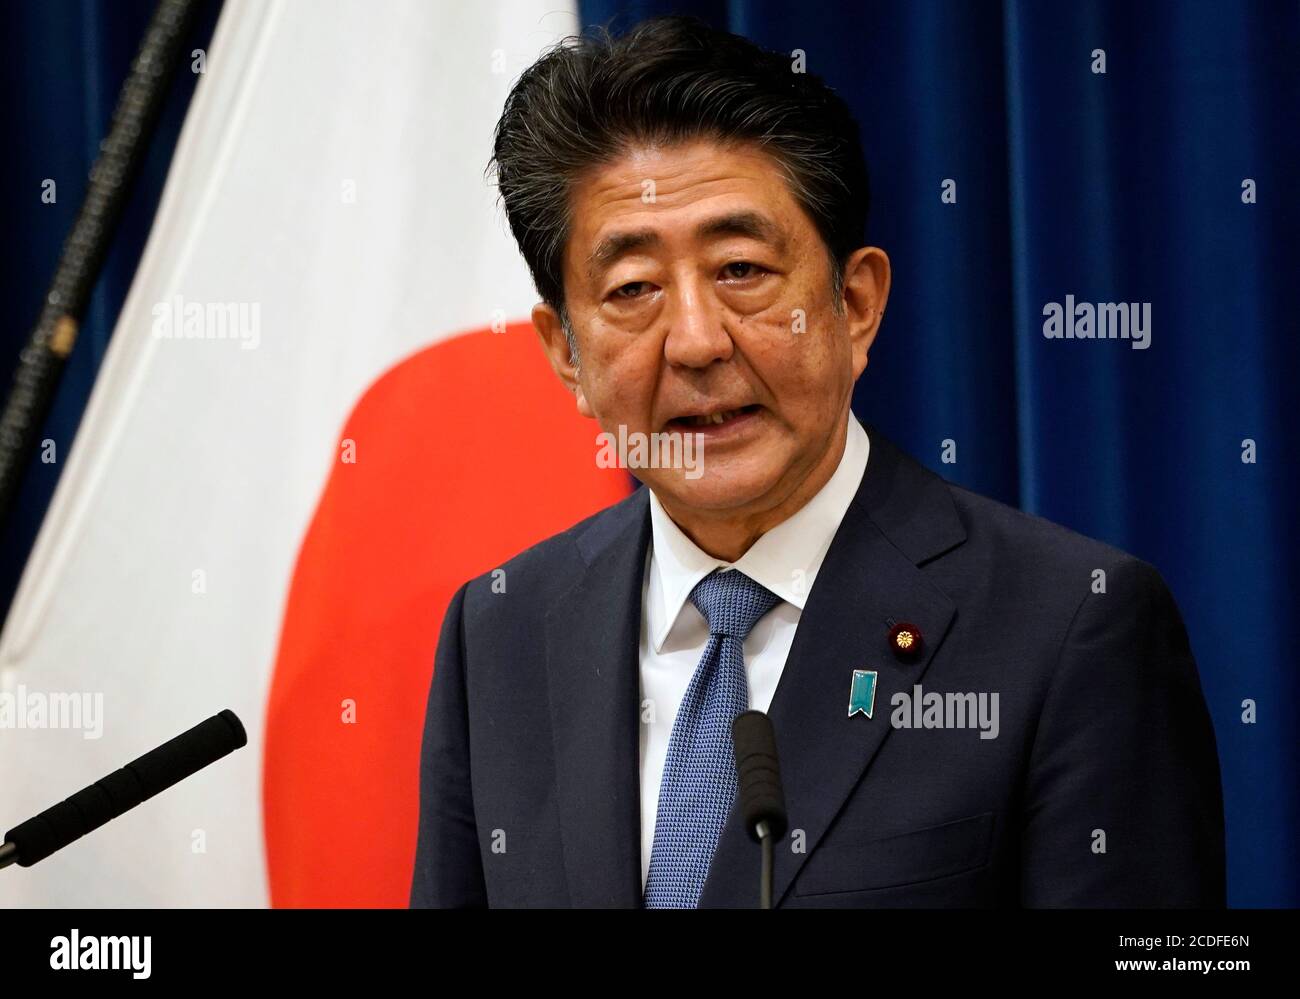 Tokyo, Japan. 28th Aug, 2020. Japanese Prime Minister Shinzo Abe speaks during a press conference in Tokyo, Japan, Aug. 28, 2020. Japanese Prime Minister Shinzo Abe said at a press conference Friday that he would step down from his post due to health concerns. (Franck Robichon/Pool via Xinhua) Credit: Xinhua/Alamy Live News Stock Photo